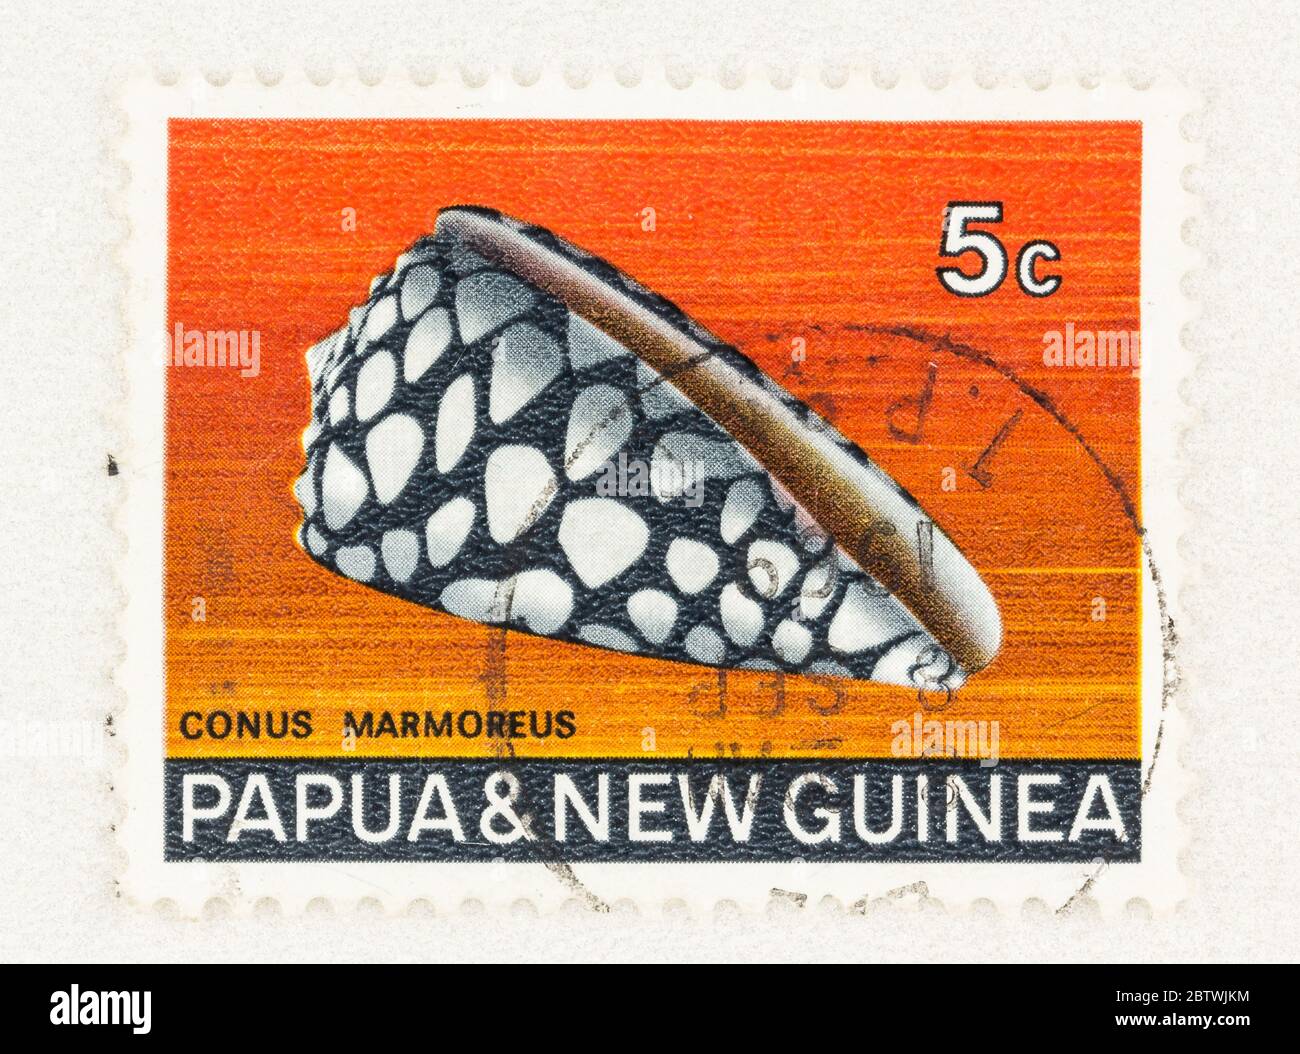 SEATTLE WASHINGTON - May 25, 2020:  Marbled Cone snail on Papua and New Giunea 5 cent stamp. Scott # 268 Stock Photo